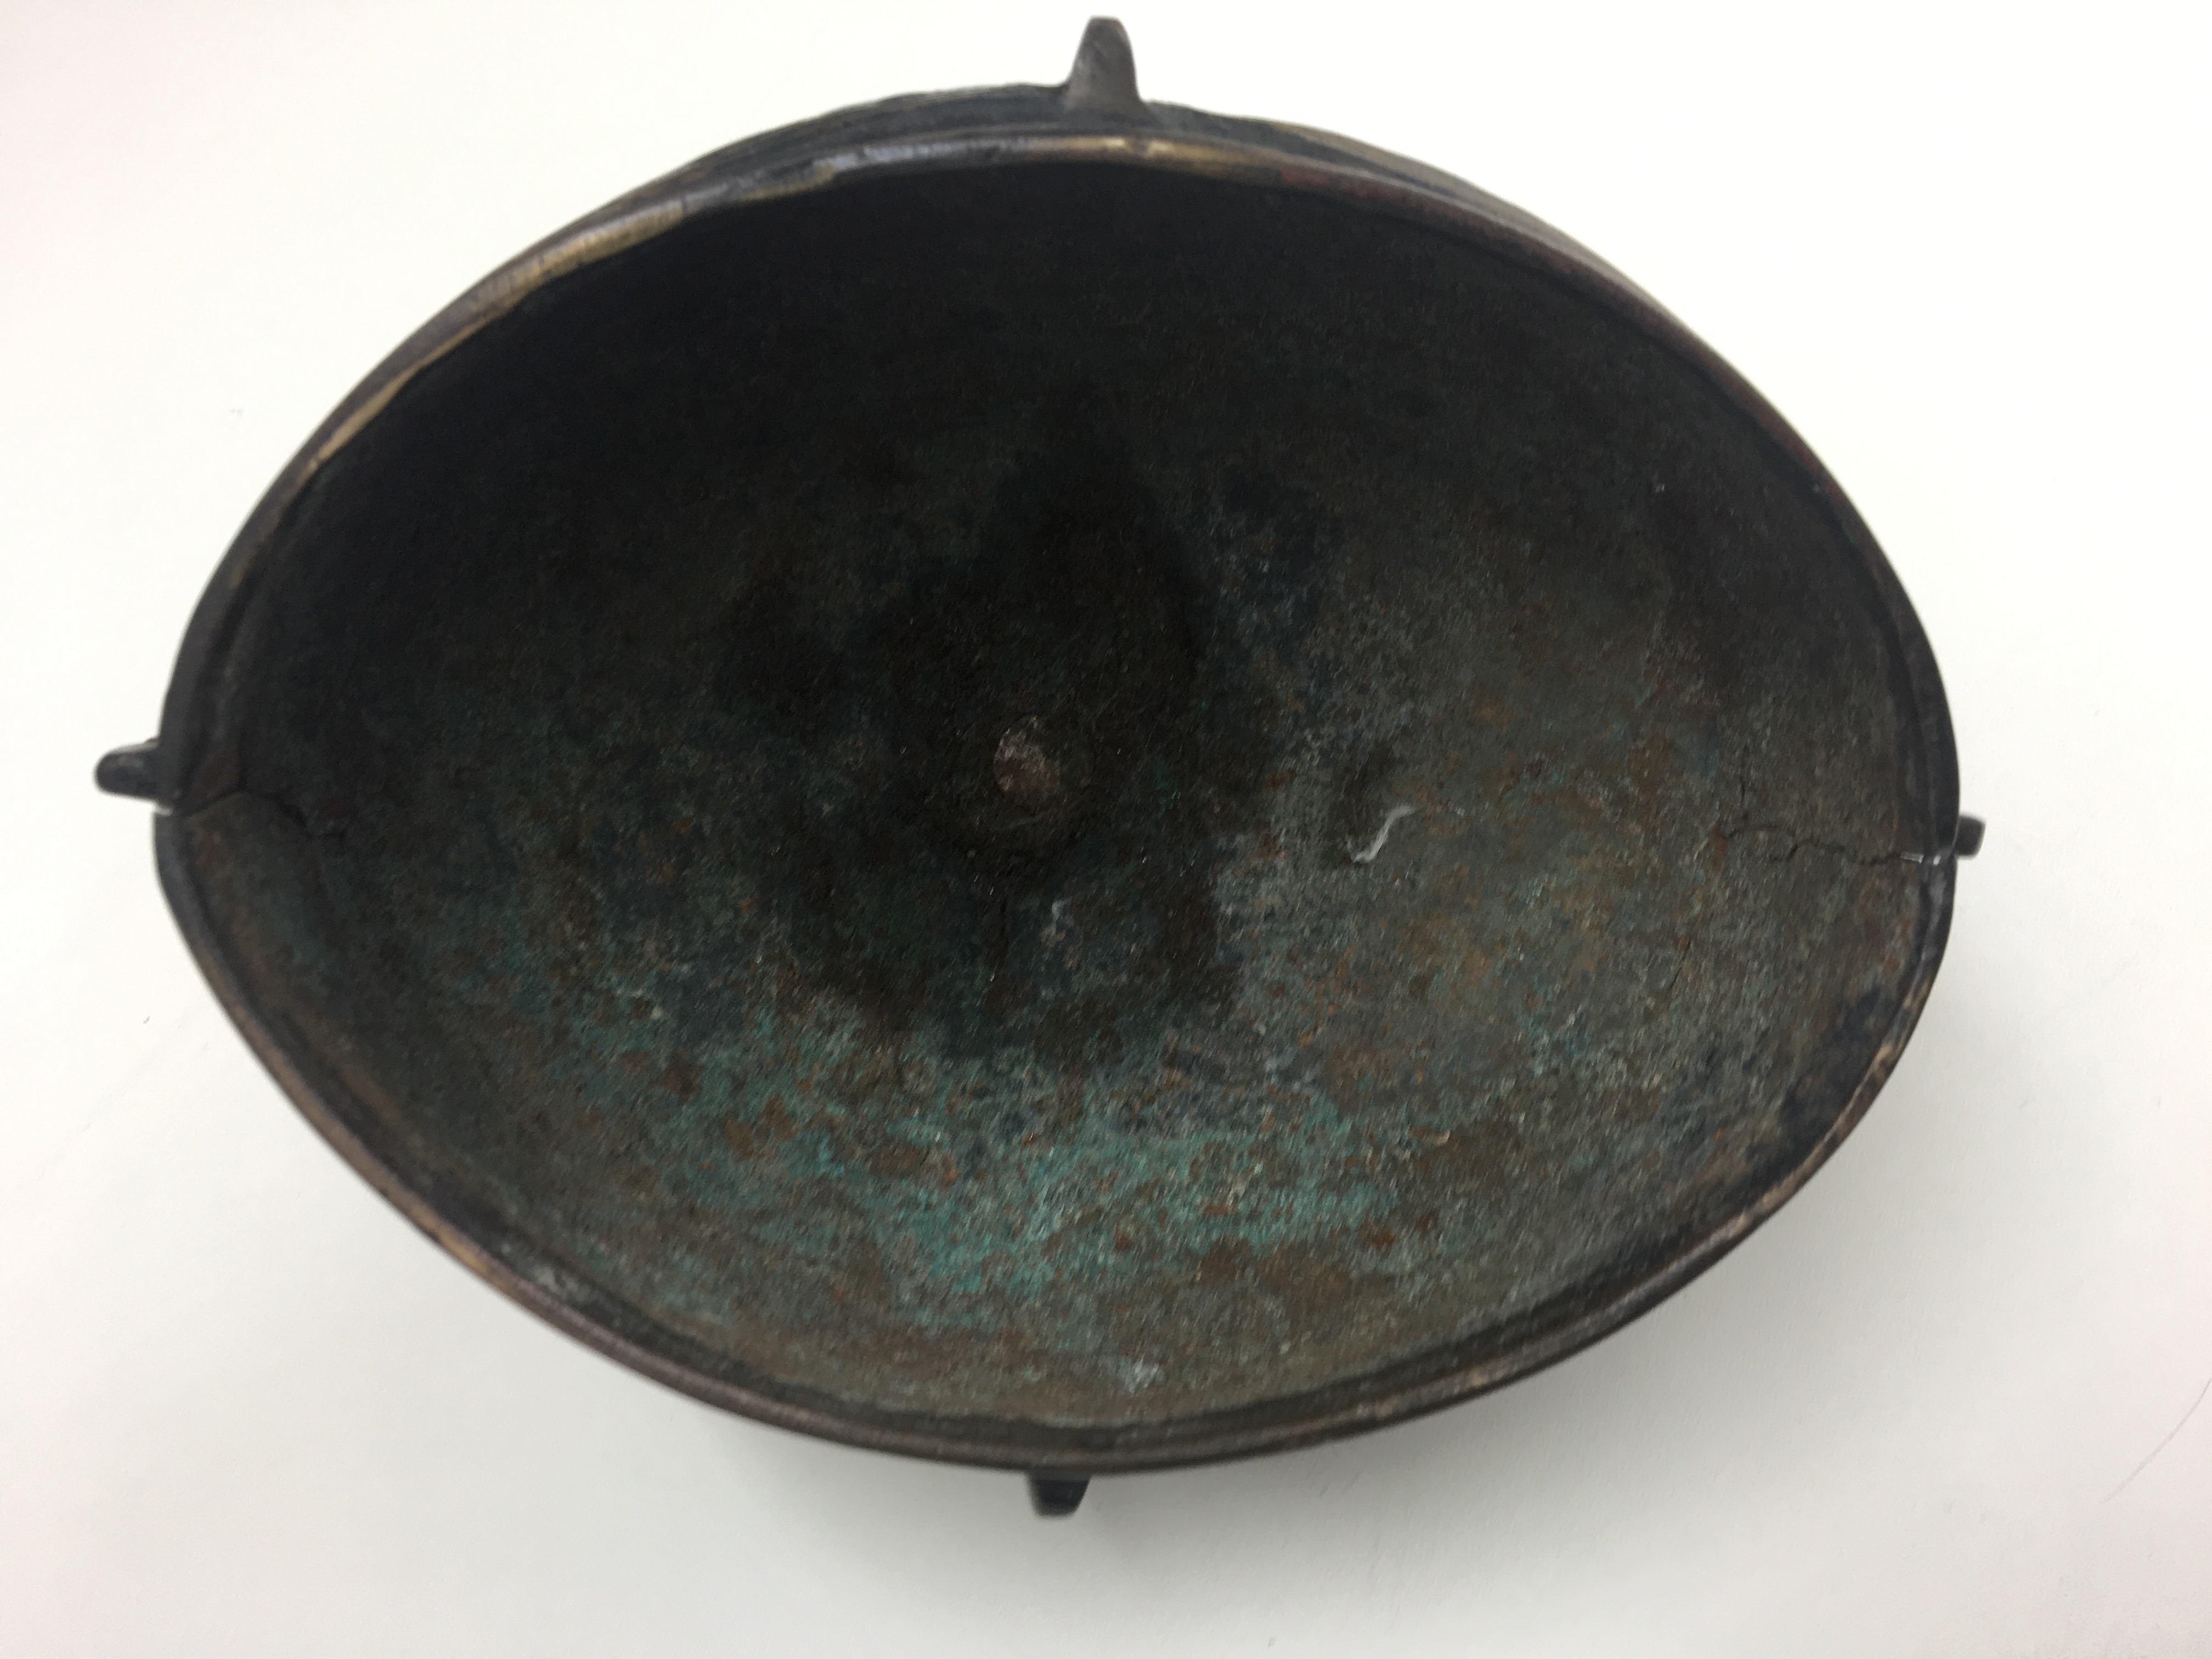 Archaic Bronze Qing Dynasty ceremonial wine vessel - Image 6 of 9